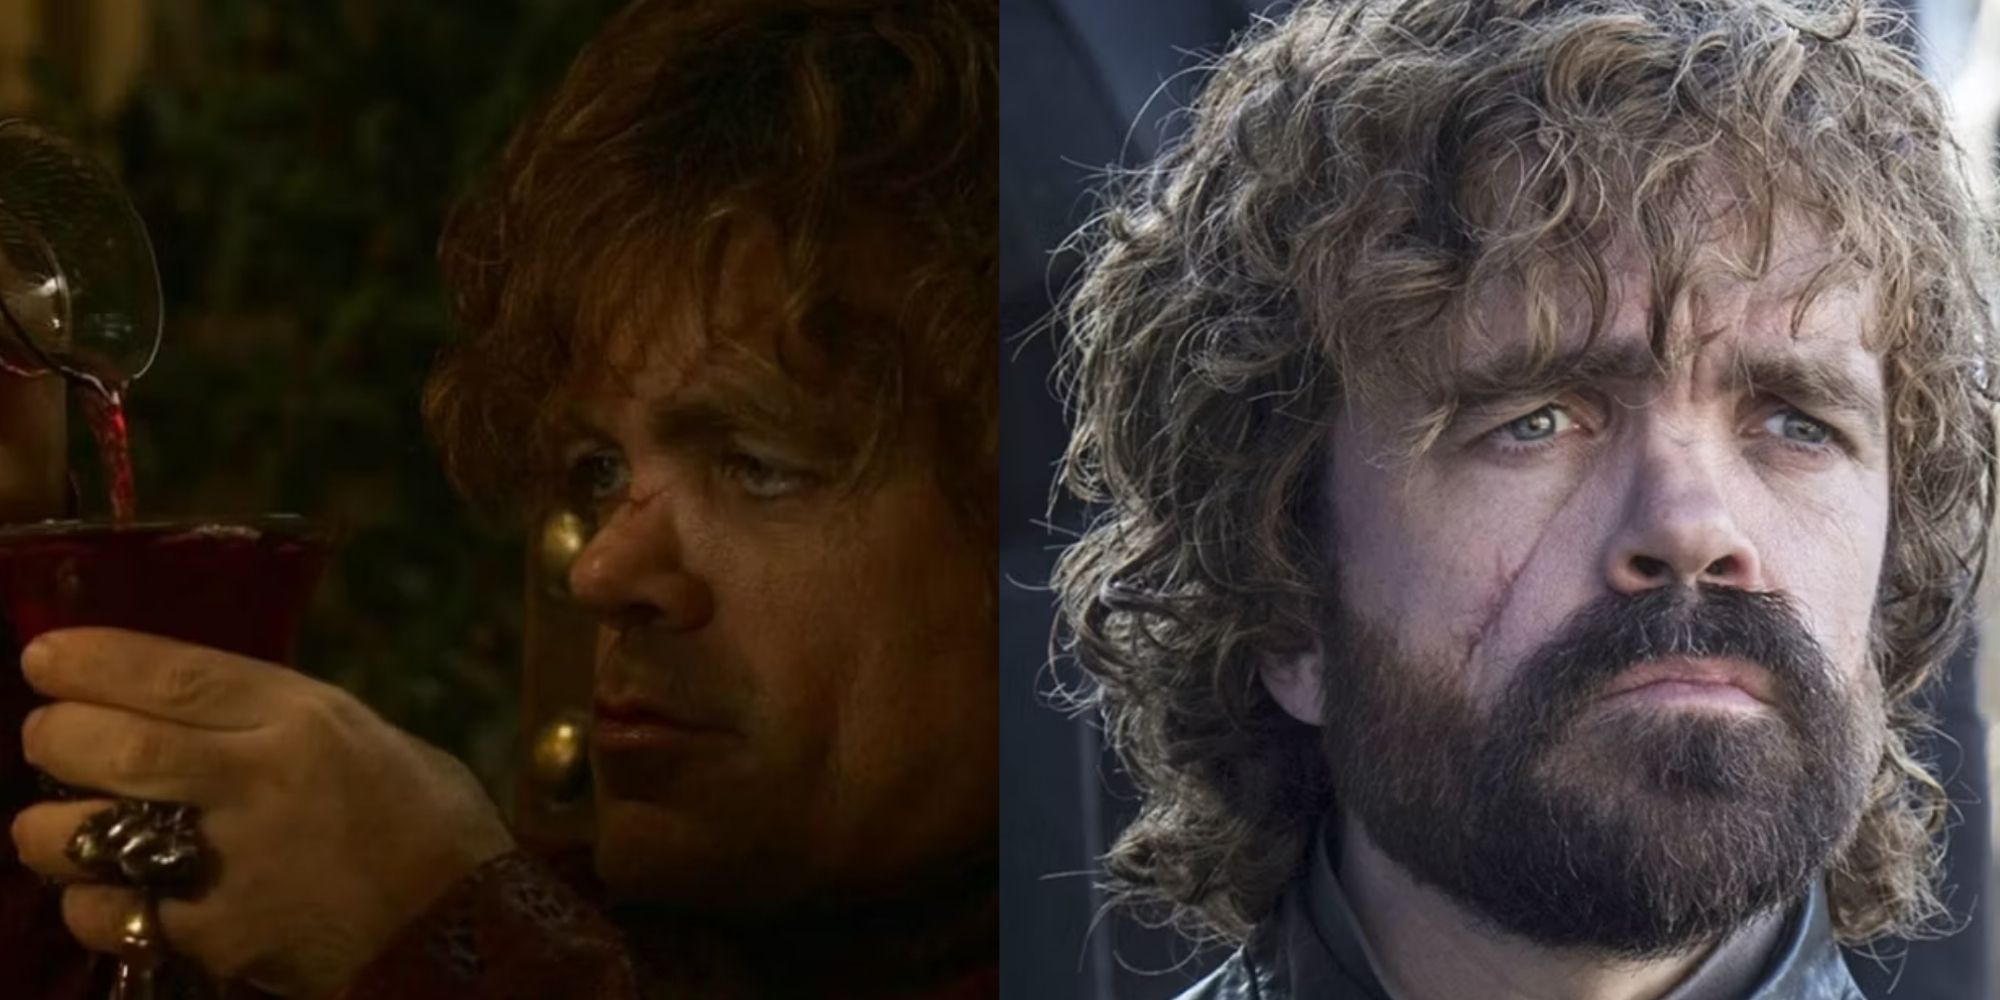 Game Of Thrones: 10 Tyrion Mannerisms & Traits From The Books Peter Dinklage Nailed